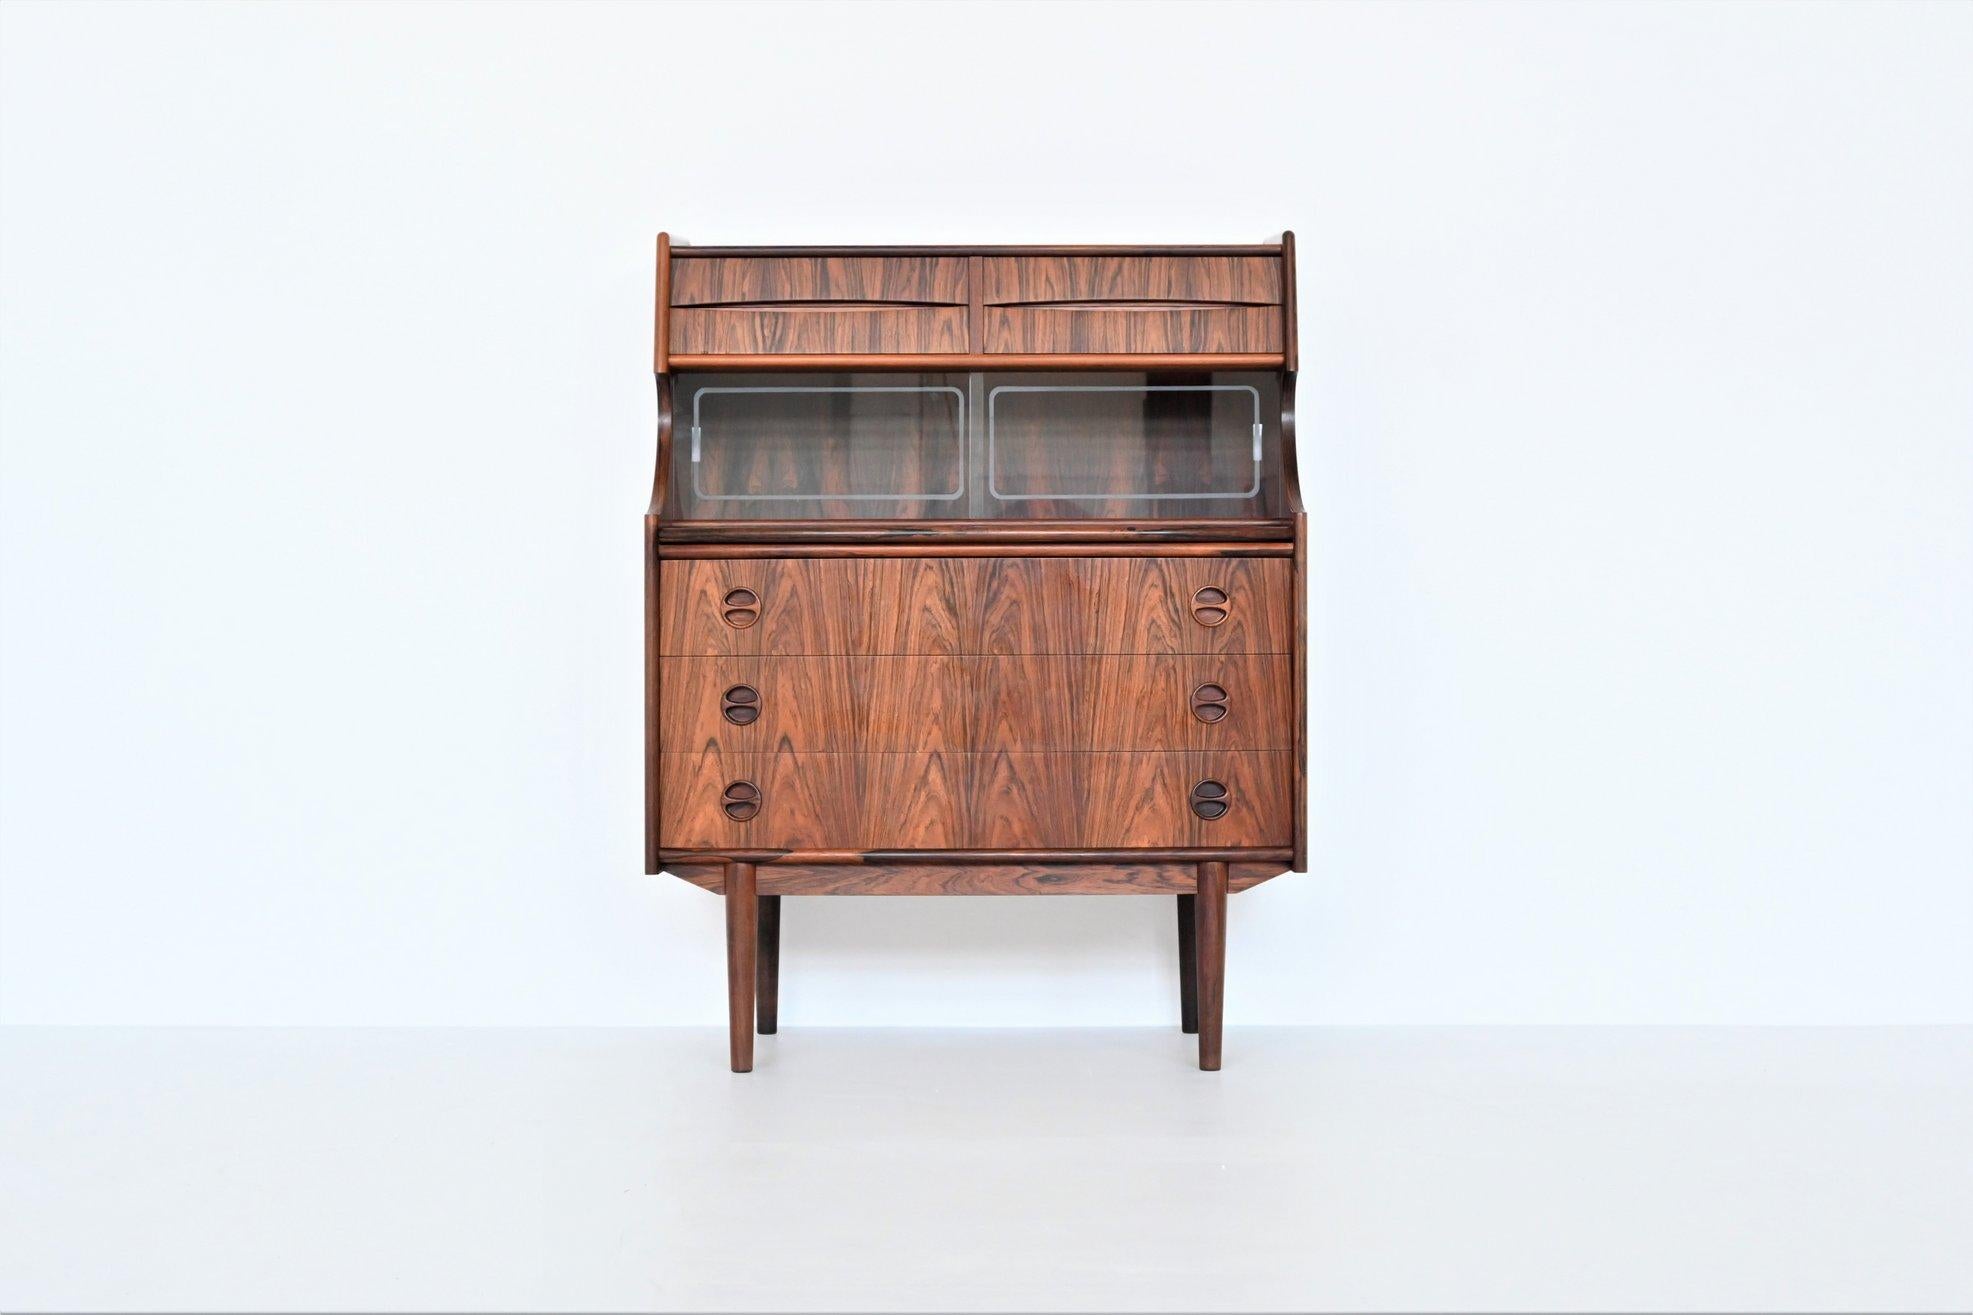 Beautiful Scandinavian secretary or writing desk designed by Gunnar Falsig for Holstebro Møbelfabrik, Denmark 1960. This very nice piece of Danish furniture is very functional with its plenty storage options and to use as a writing desk. The cabinet